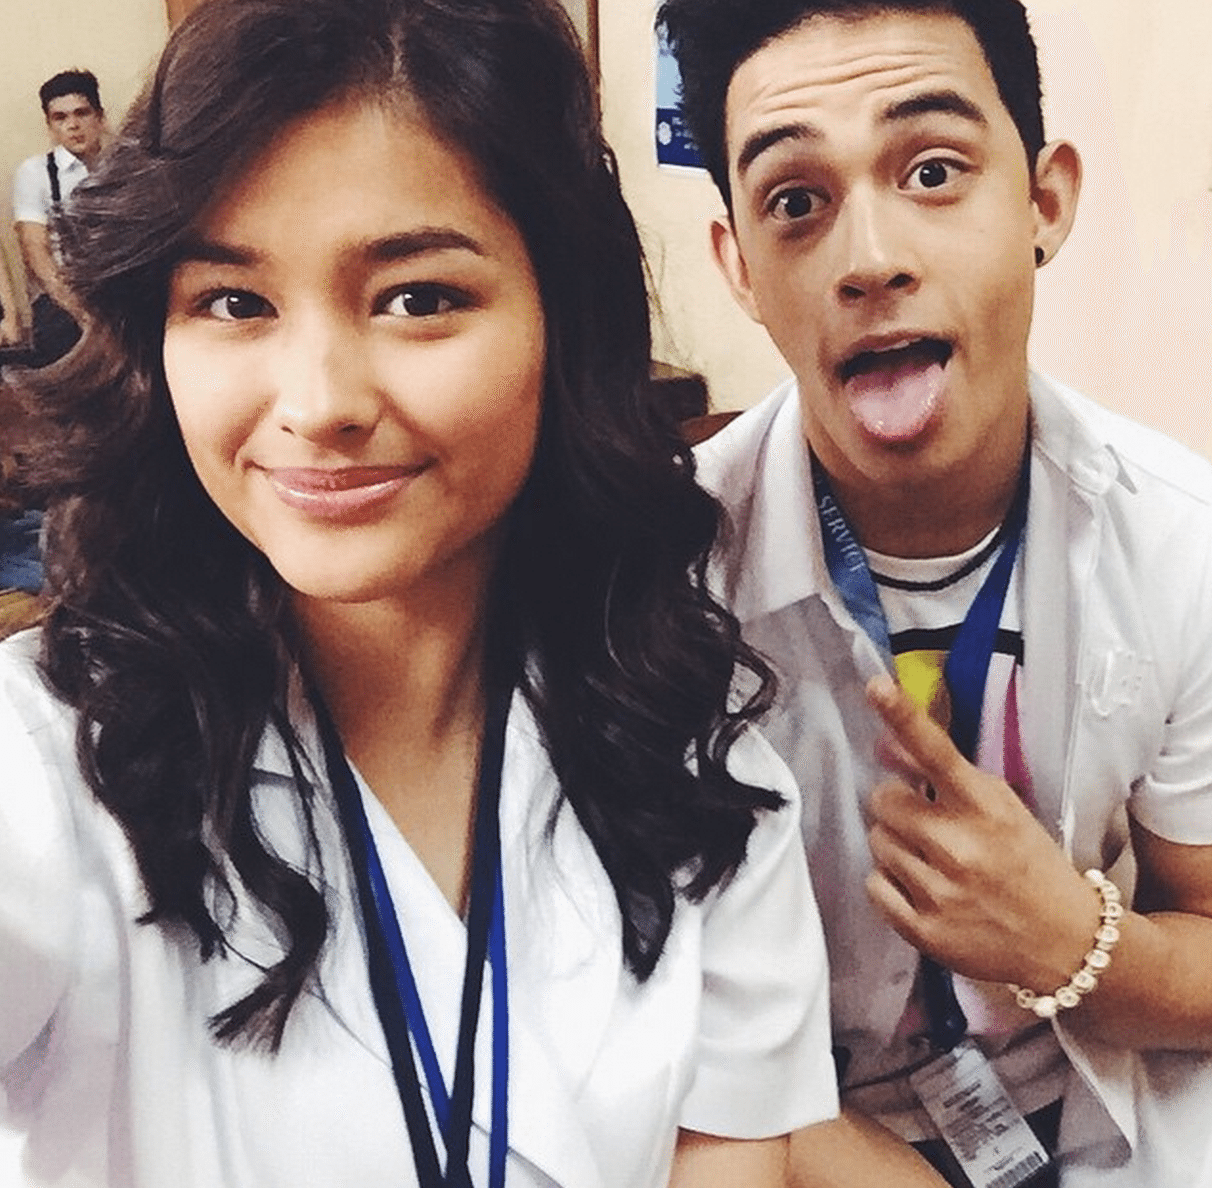 Diego with Liza Soberano at the set of Forevermore